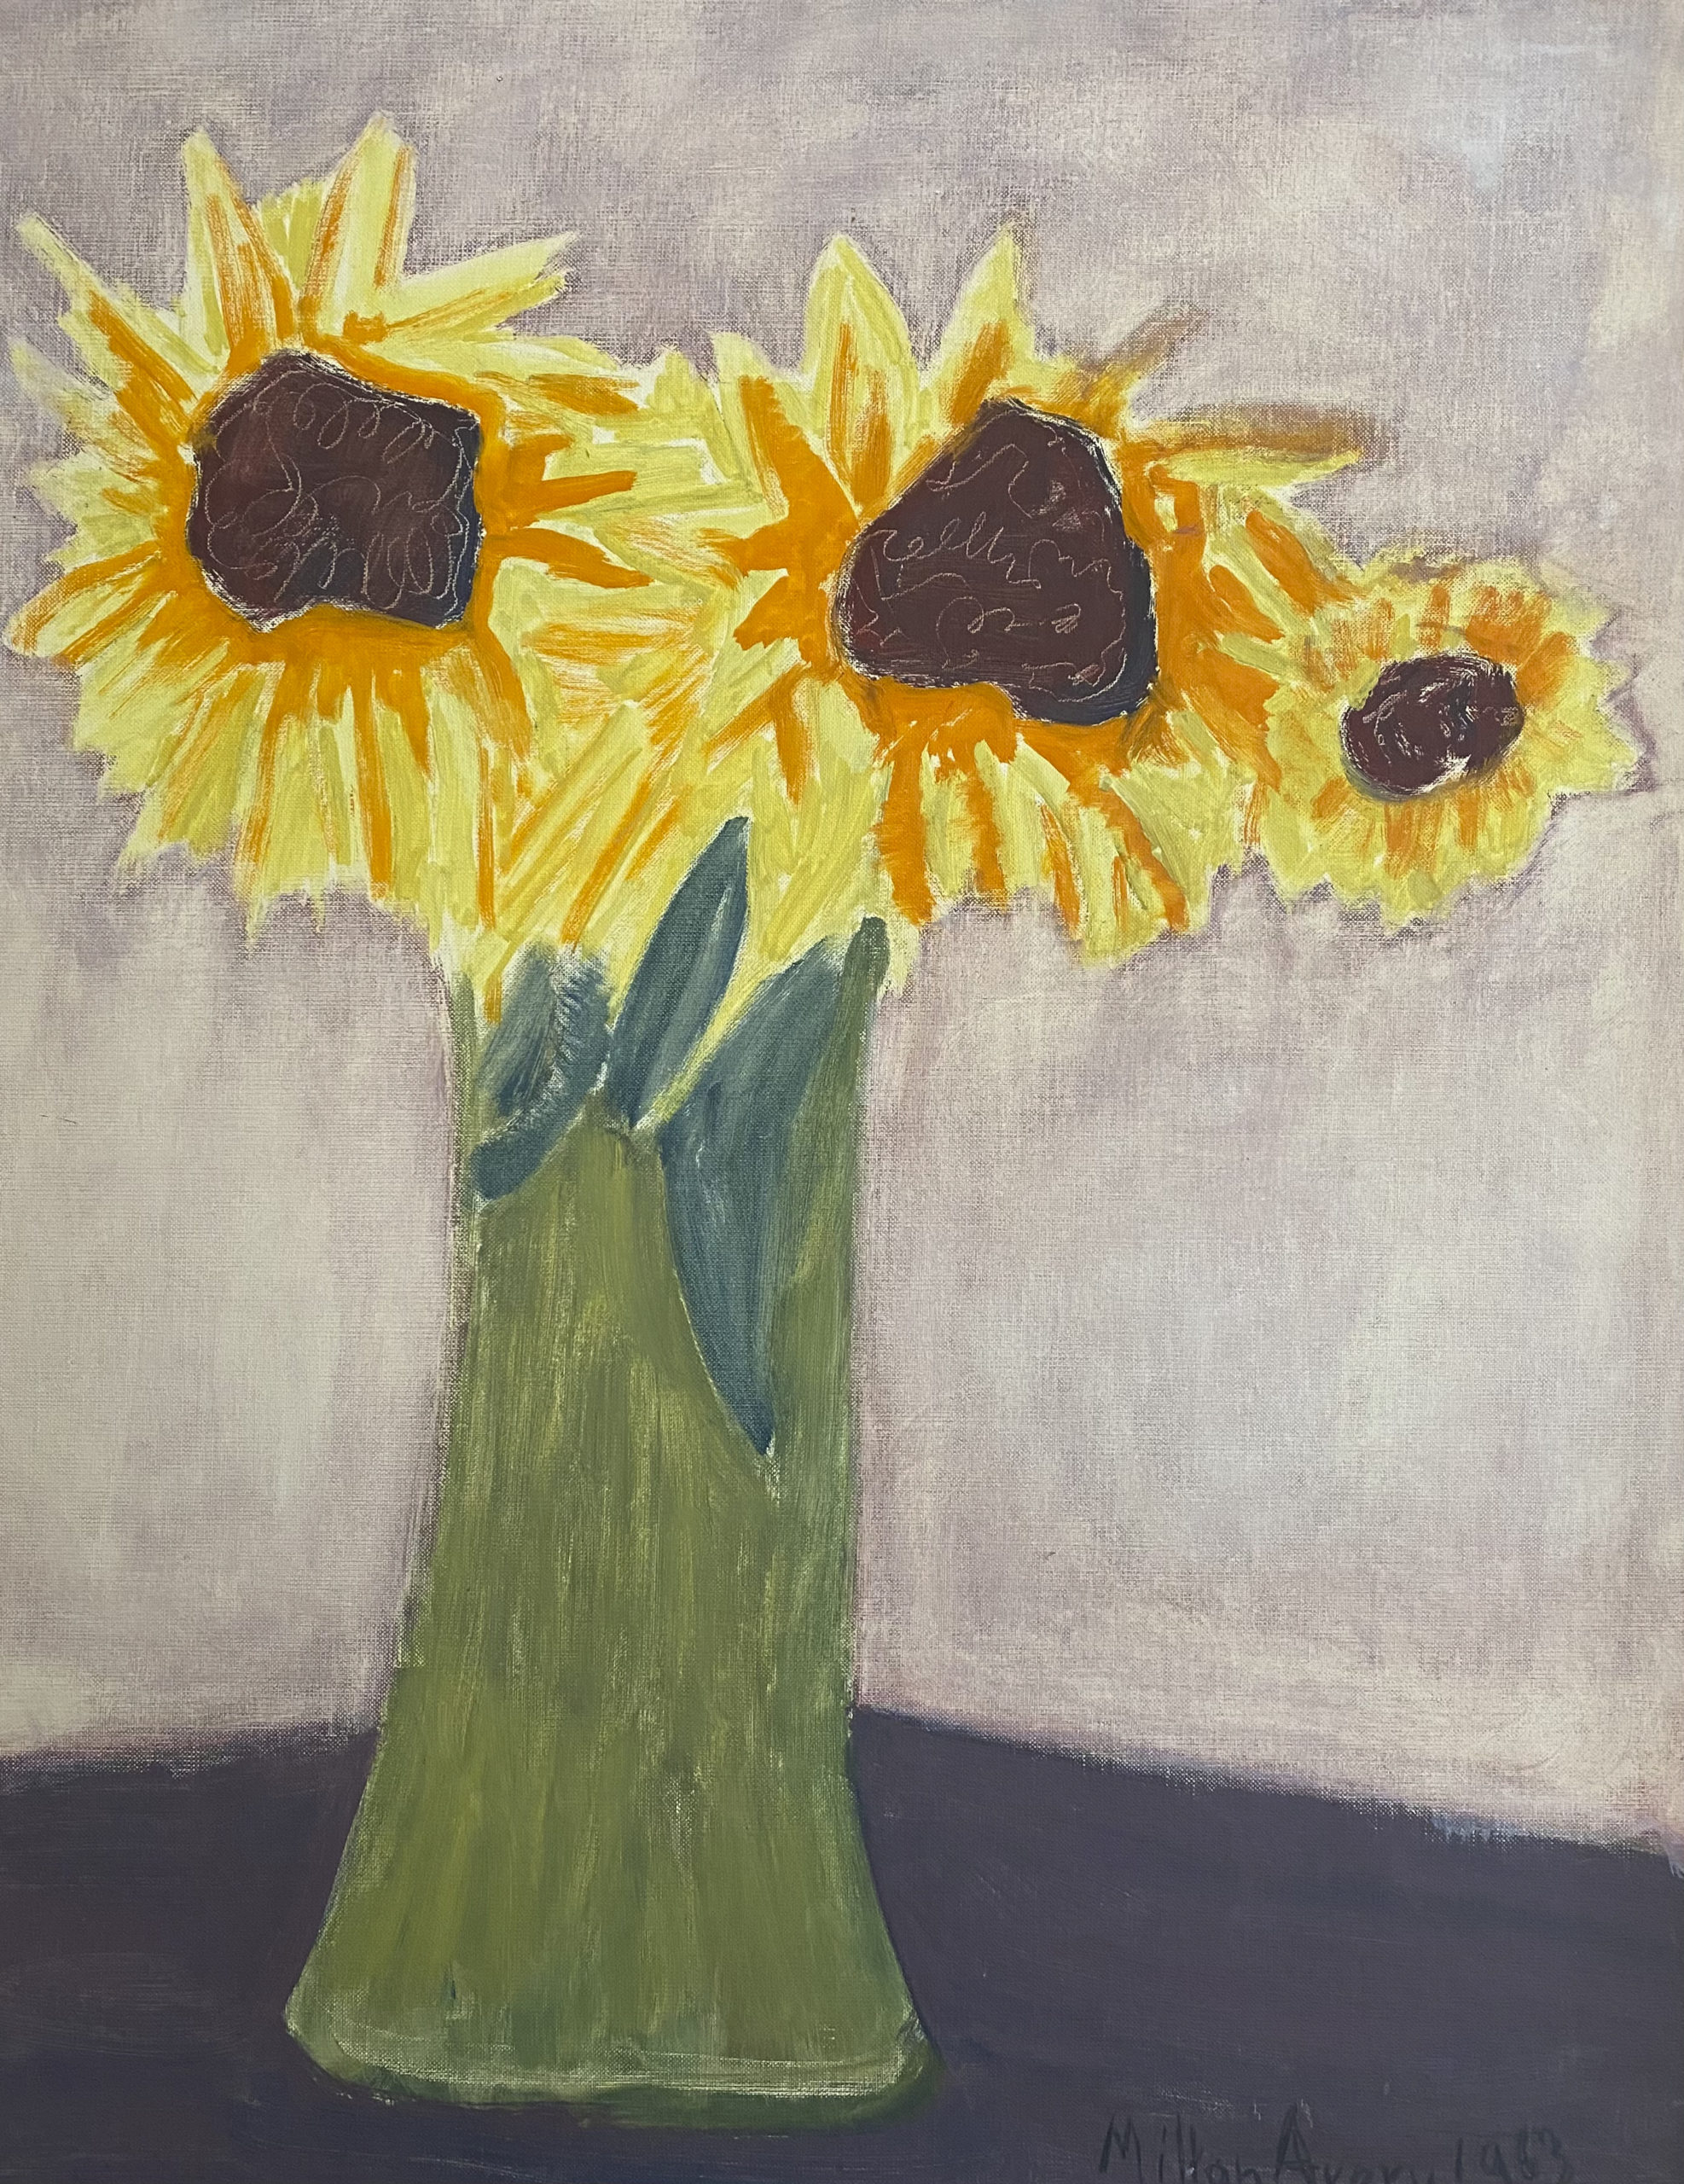 Visit A painting of sunflowers in a vase.